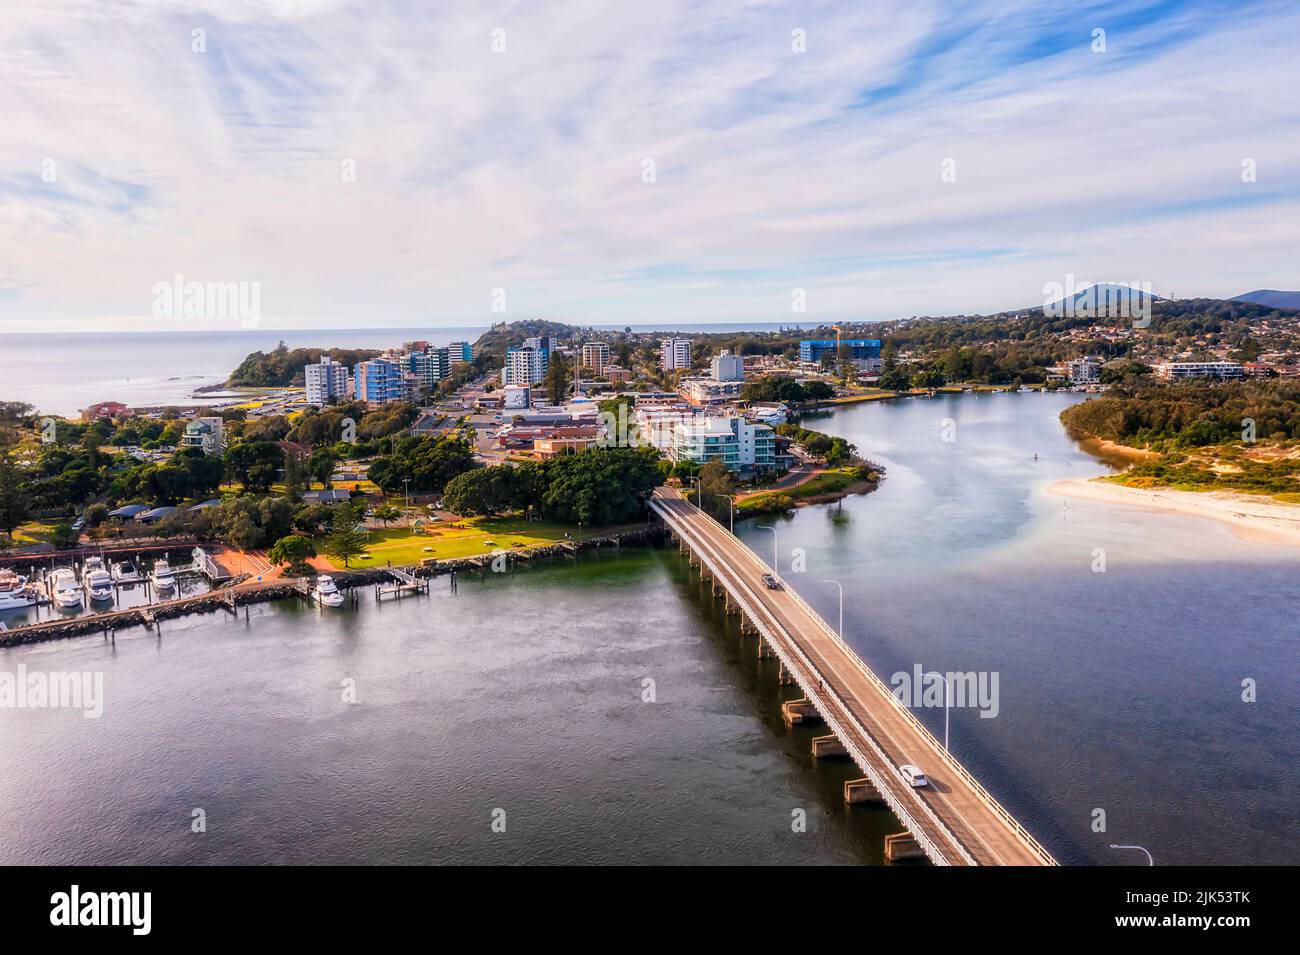 Downtown main streets in Forster town on Pacific coast of Australia from bridge across Wallis lake - aerial view. Stock Photo